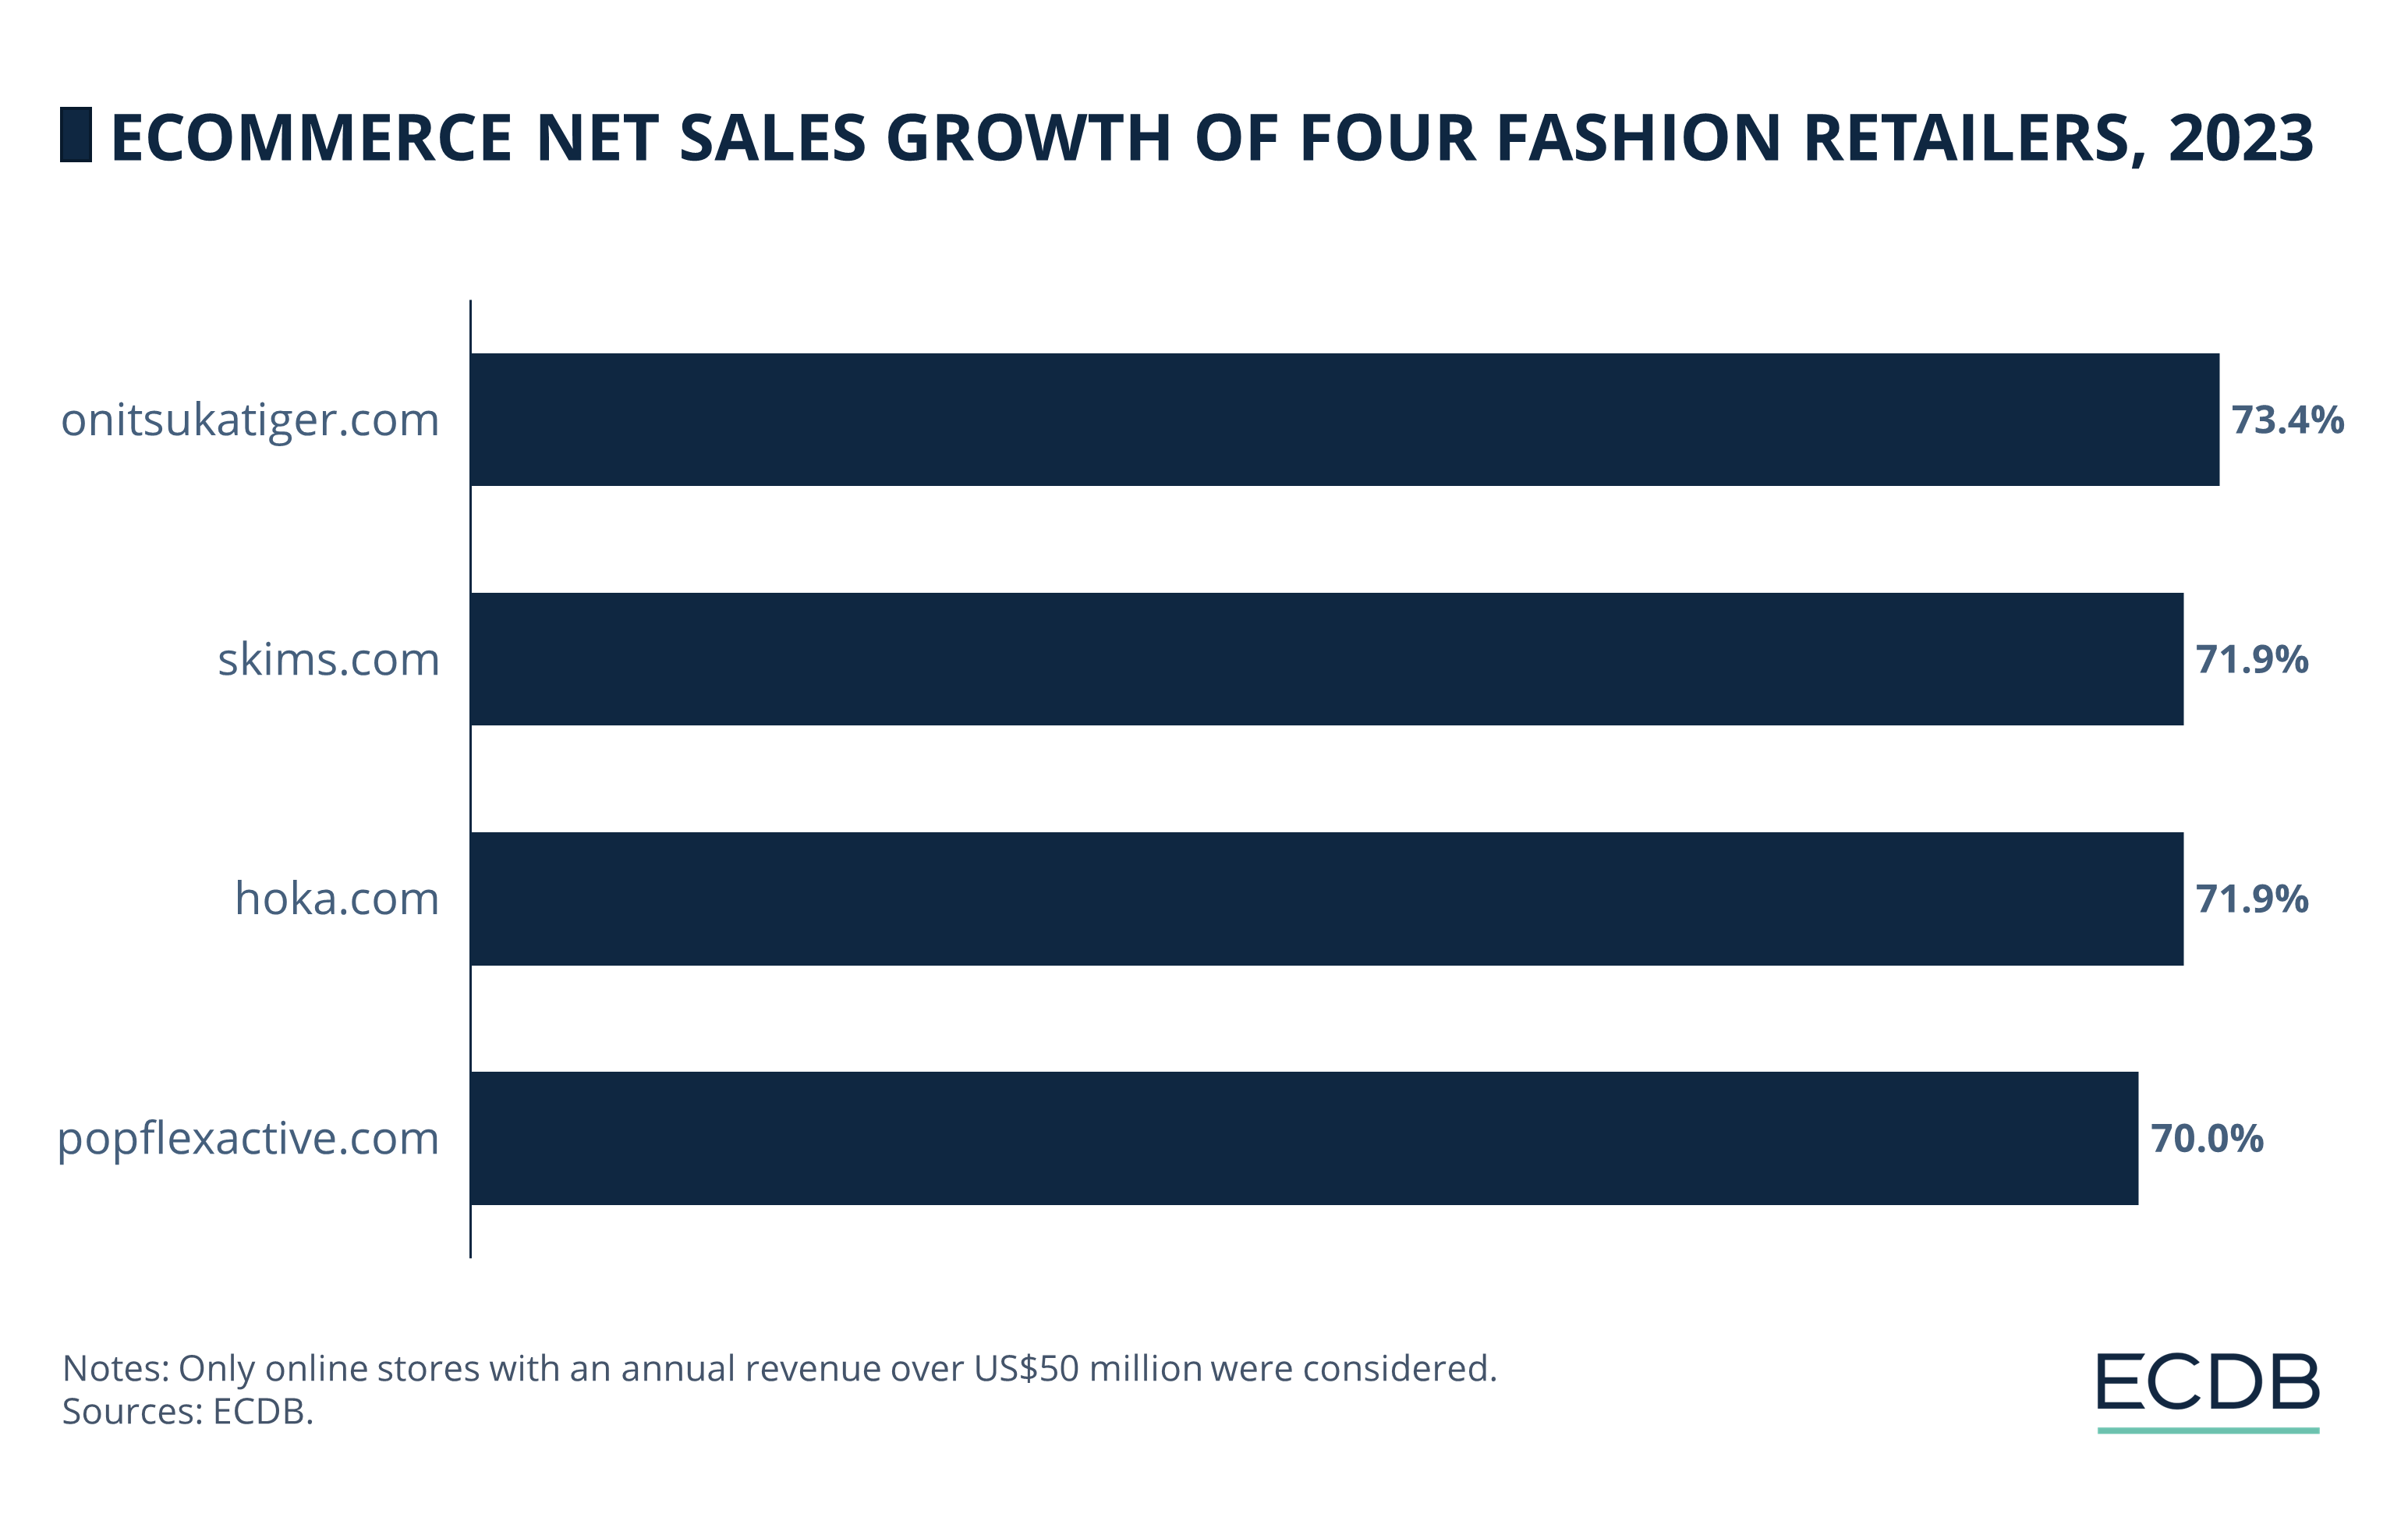 eCommerce Net Sales Growth of Four Fashion Retailers, 2023